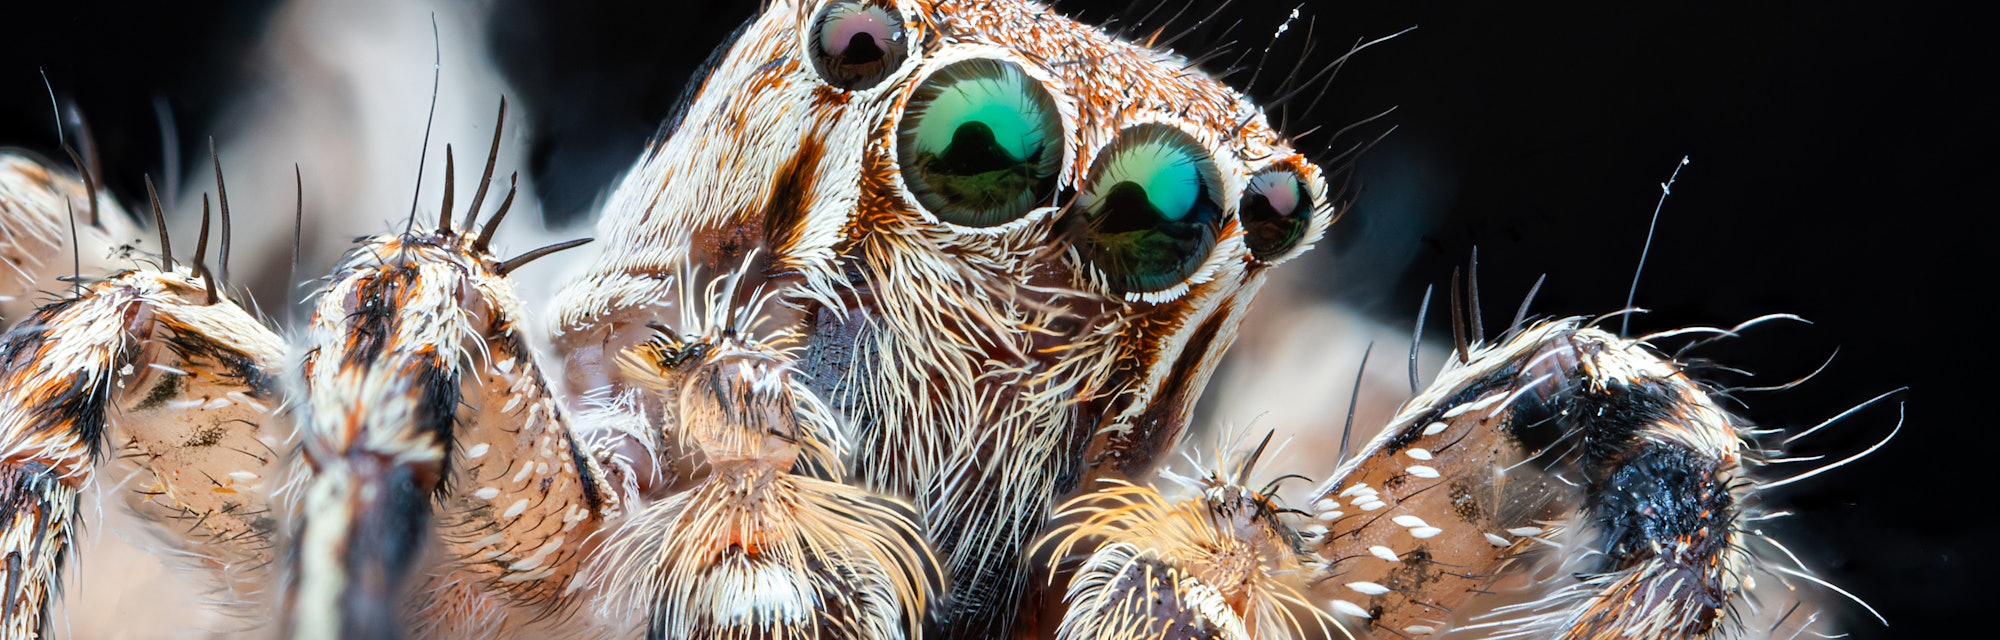 Macro photographs of arthropods like jumping spider ,grasshopper,hony bee,worm,insect,mosquito etc